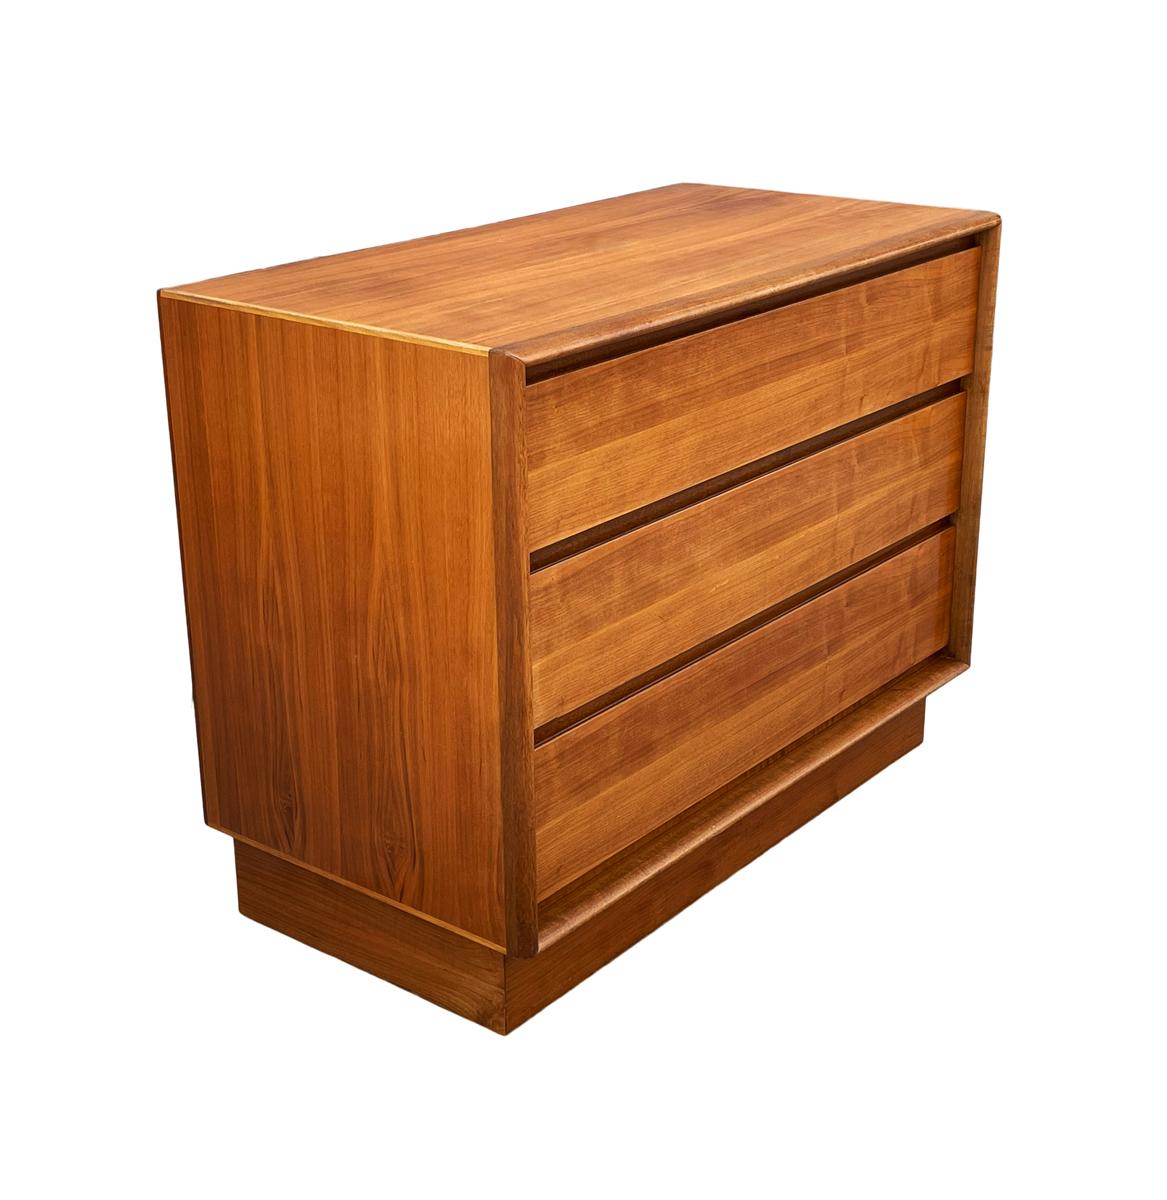 Wood Mid Century Danish Modern Dresser, Chest of Drawers or Side Cabinet in Walnut